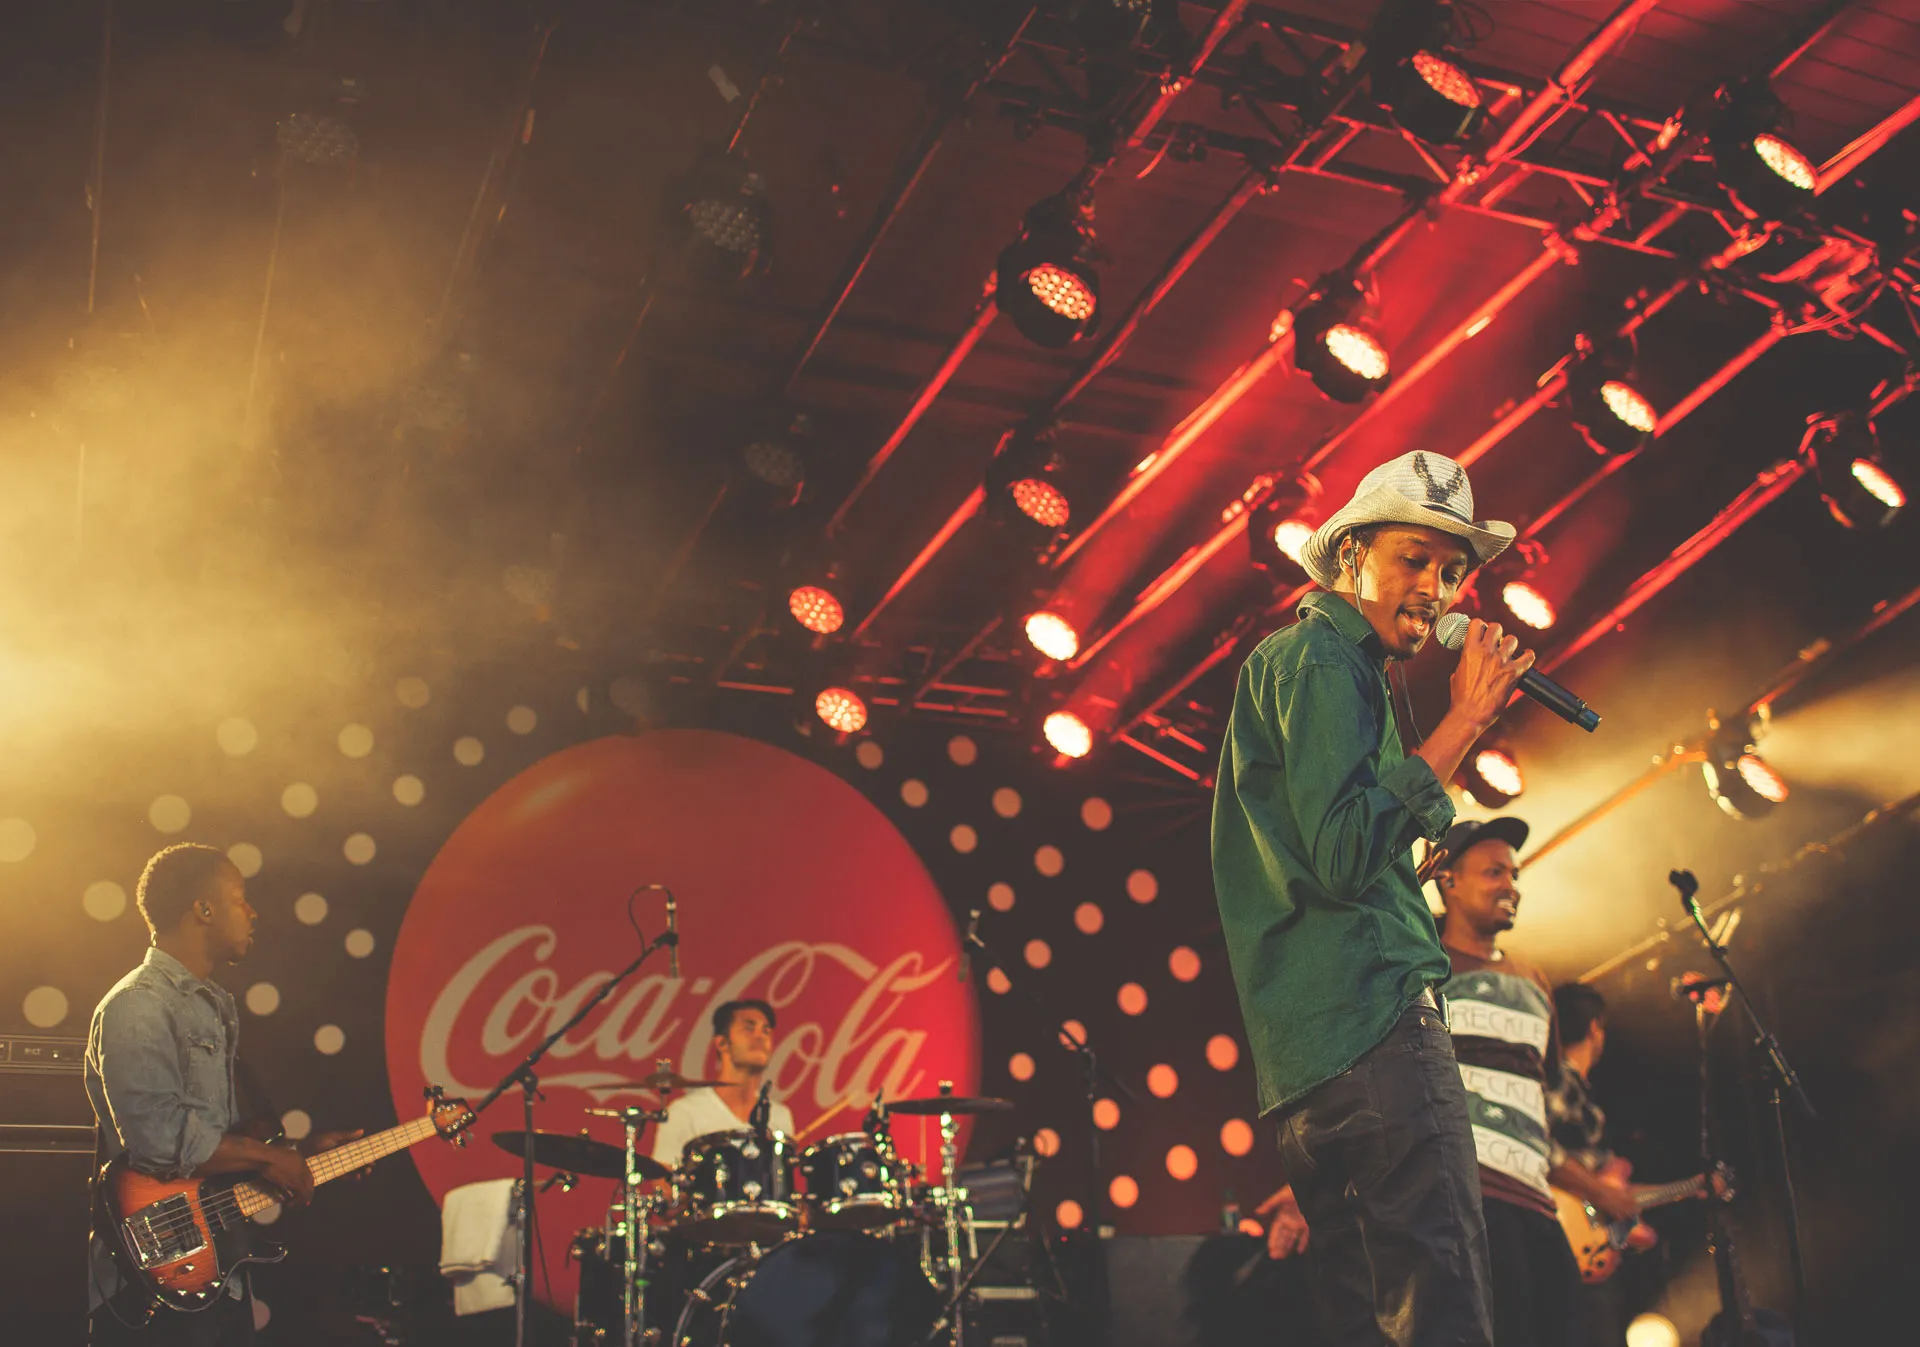 The Coca-Cola Stage at the Calgary Stampede.